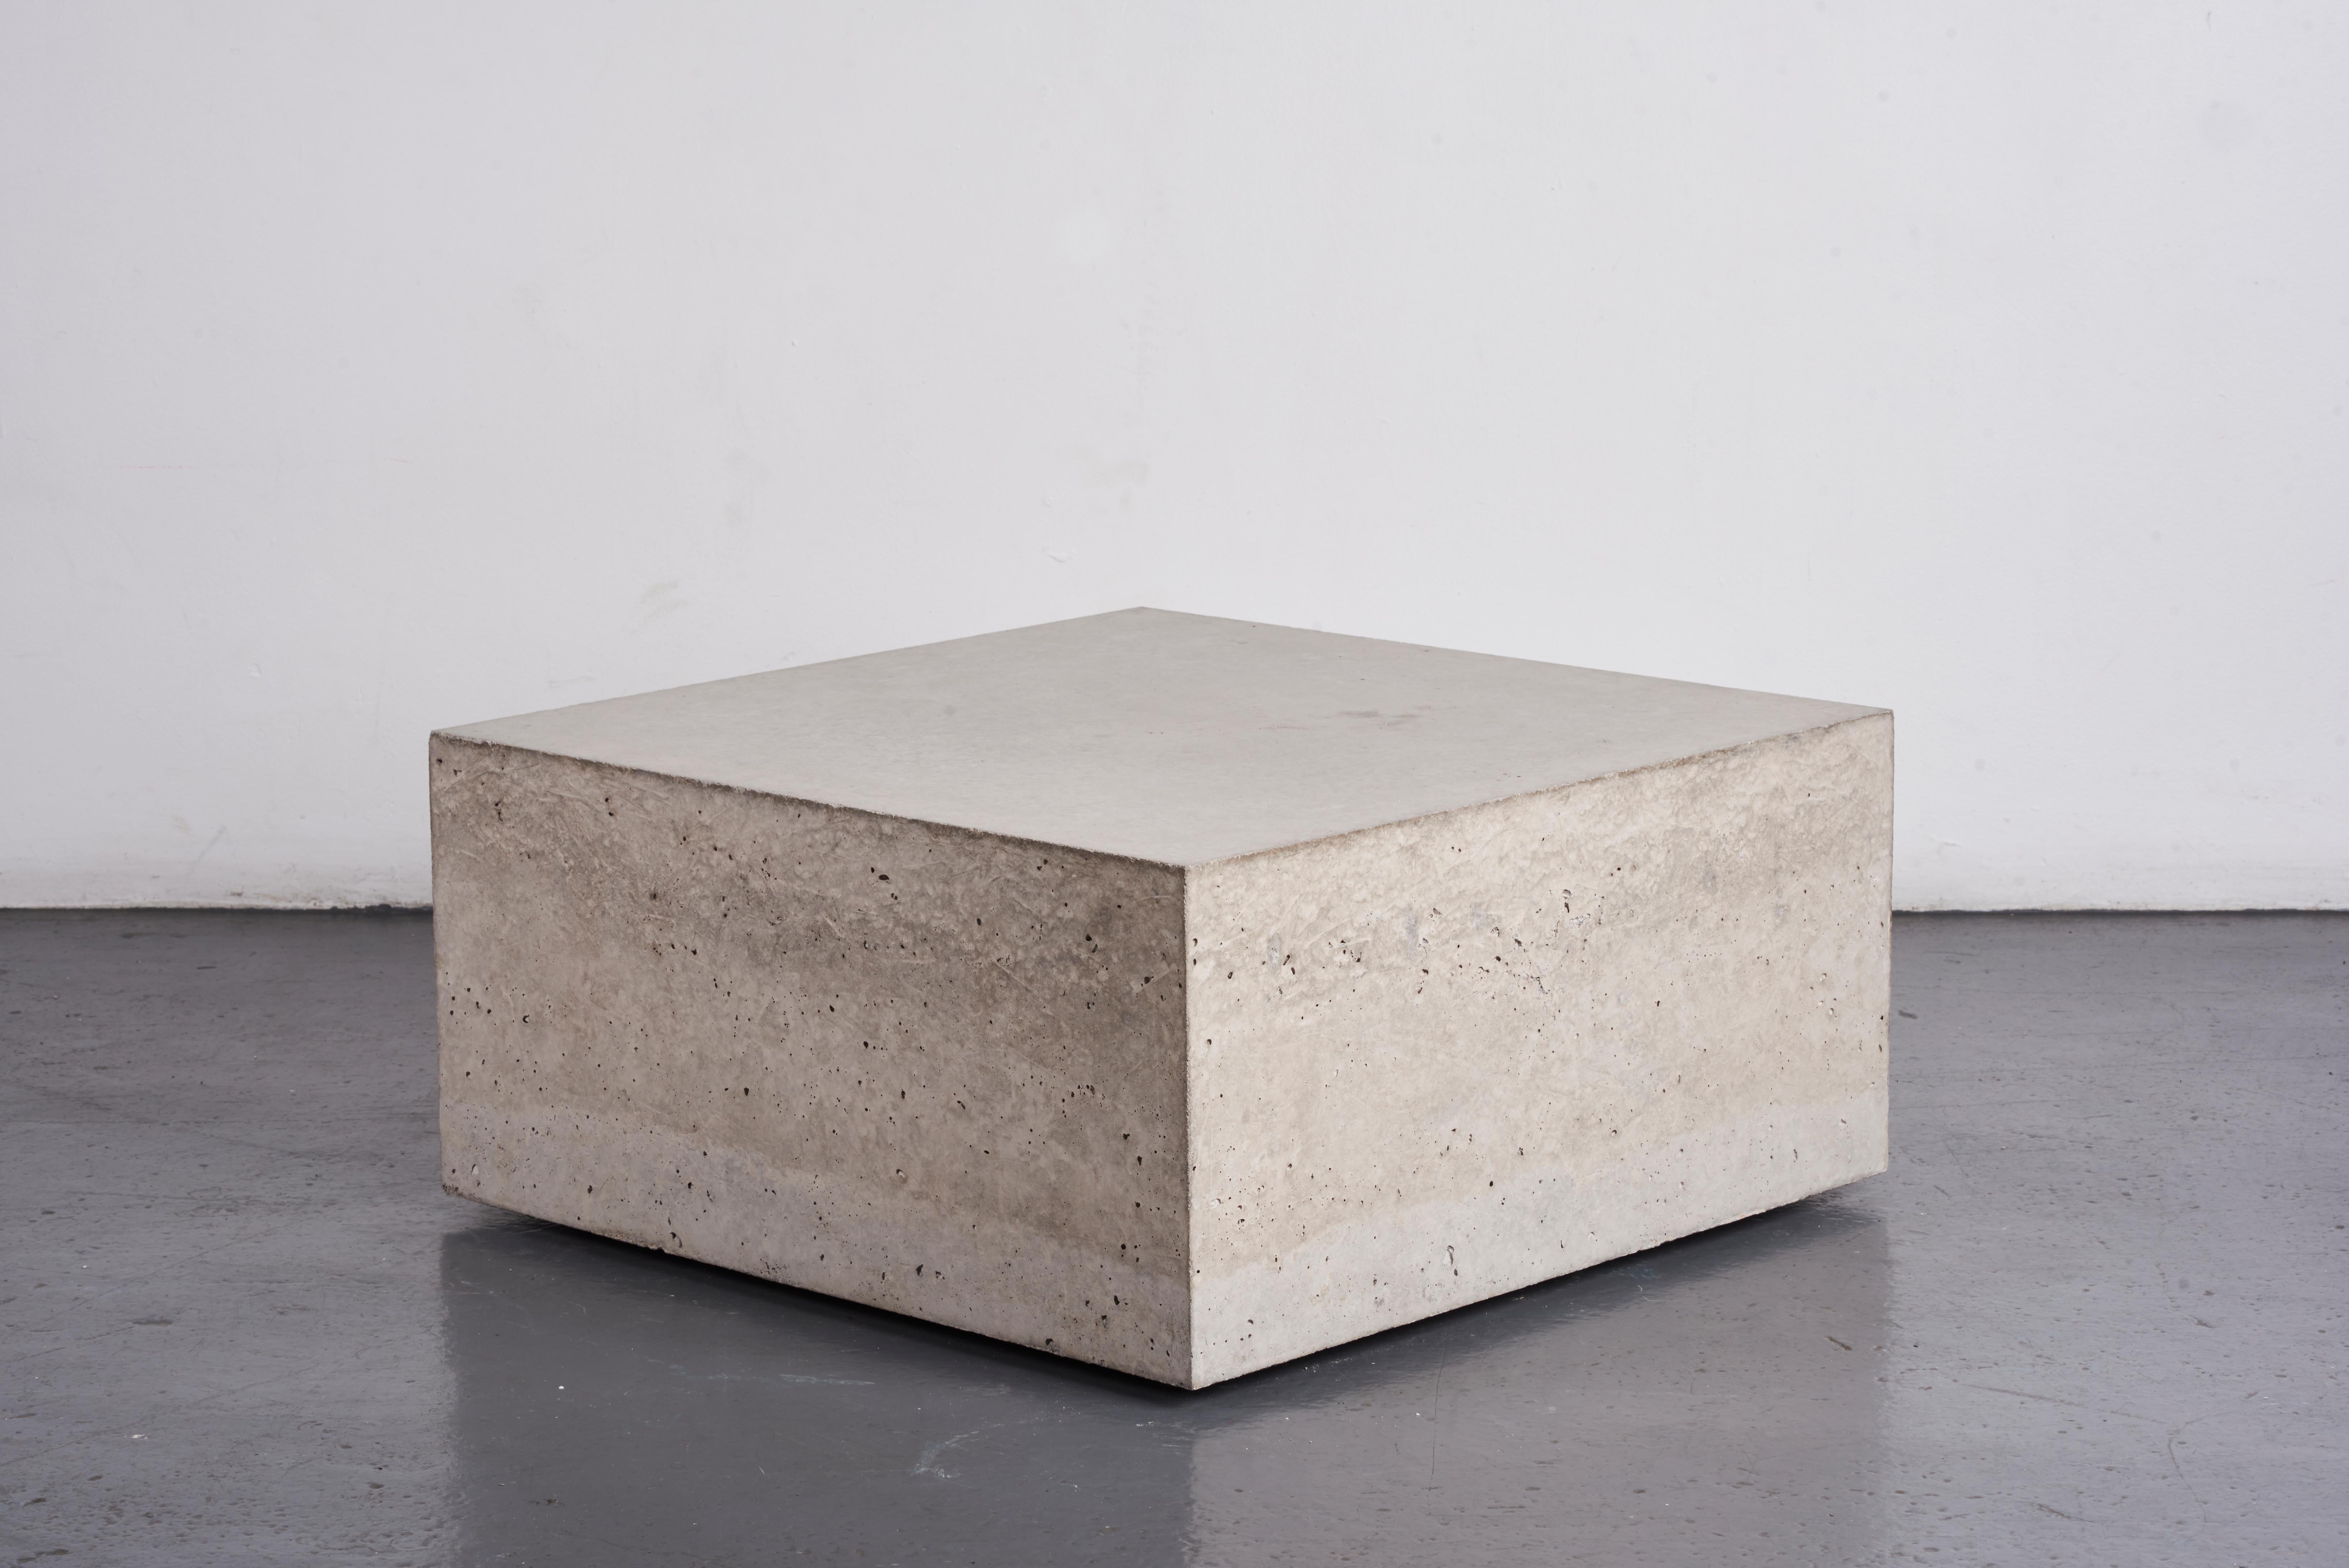 Brutalist 'Ilha' Reinforced Concrete Table, One of a Kind Artwork by Littlewhitehead